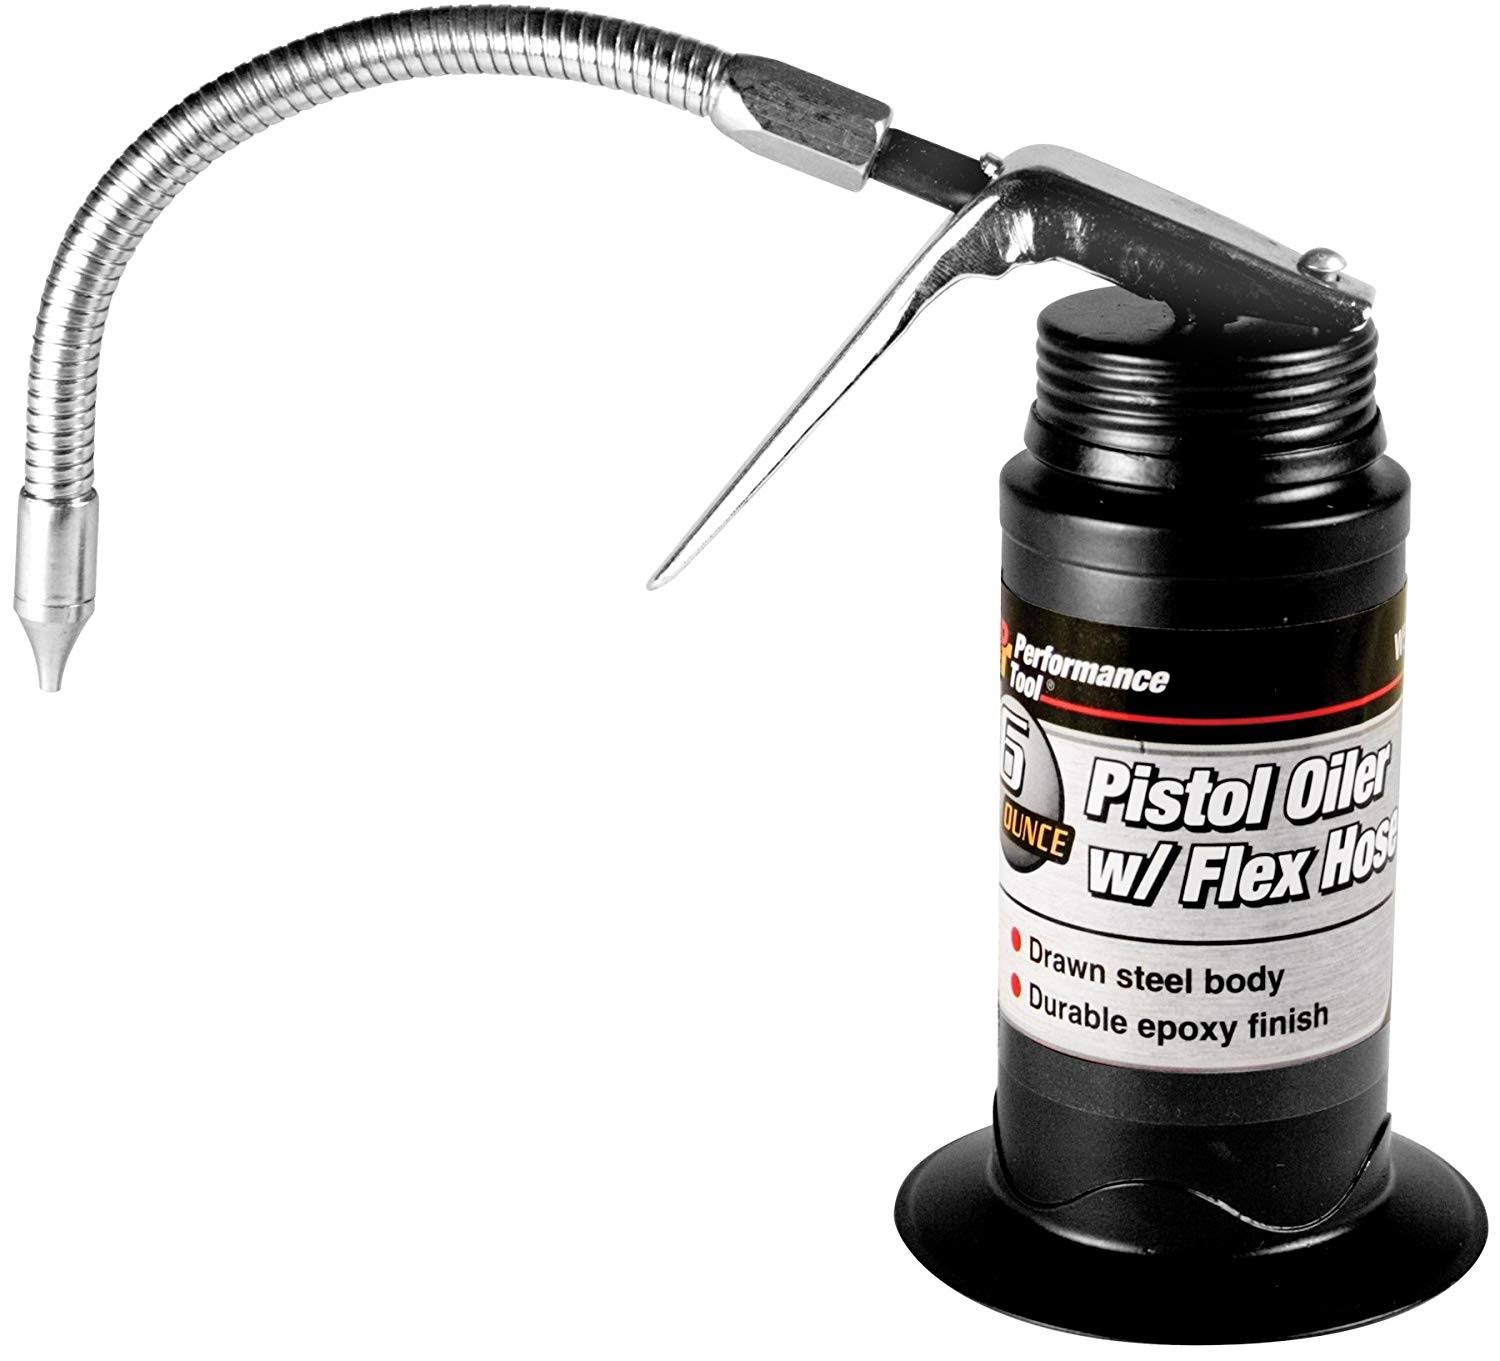 Performance Tool W54265 Pistol Oiler with Flex Hose - 180ml Capacity | Garage | 30 Day Money Back Guarantee | Free Shipping On All Orders